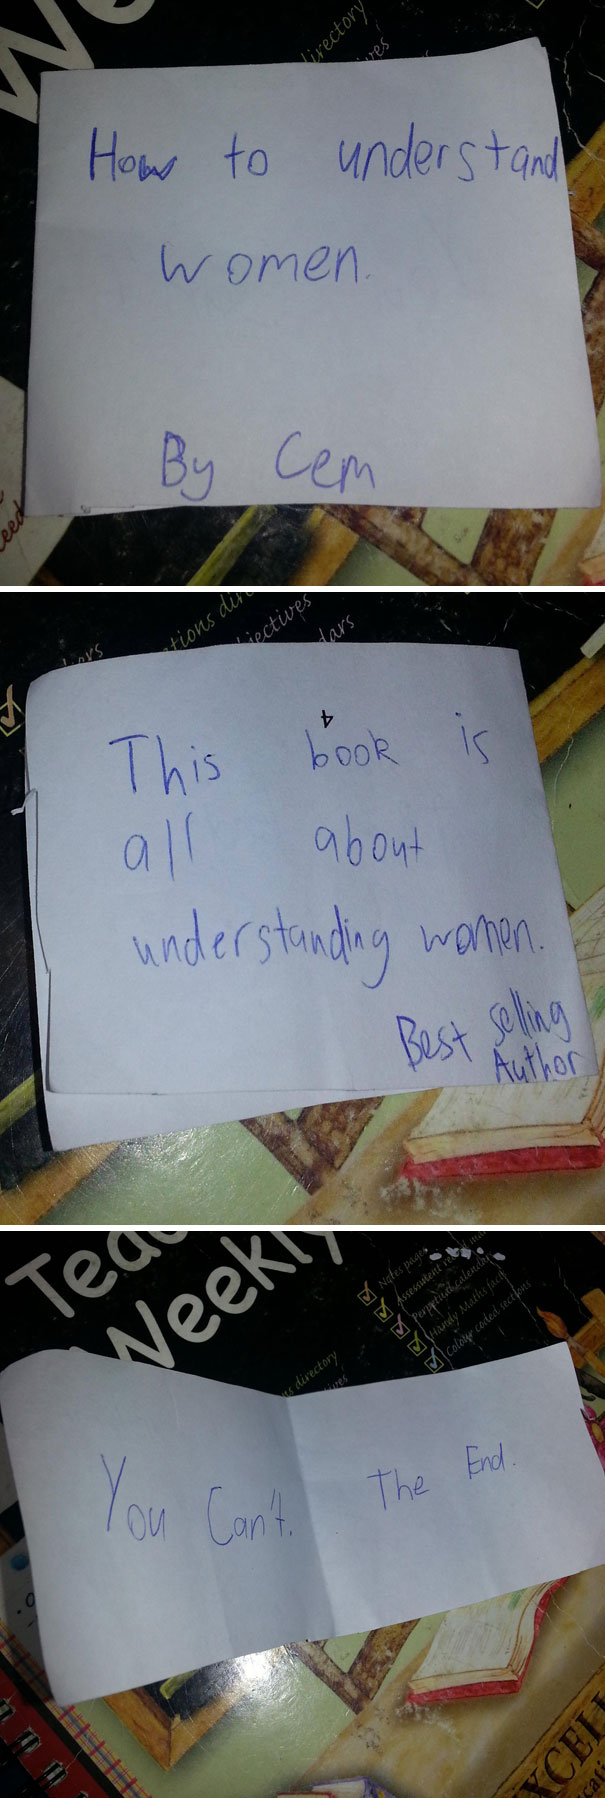 "How To Understand Women" As Written By A 12-Year-Old Boy In My Class